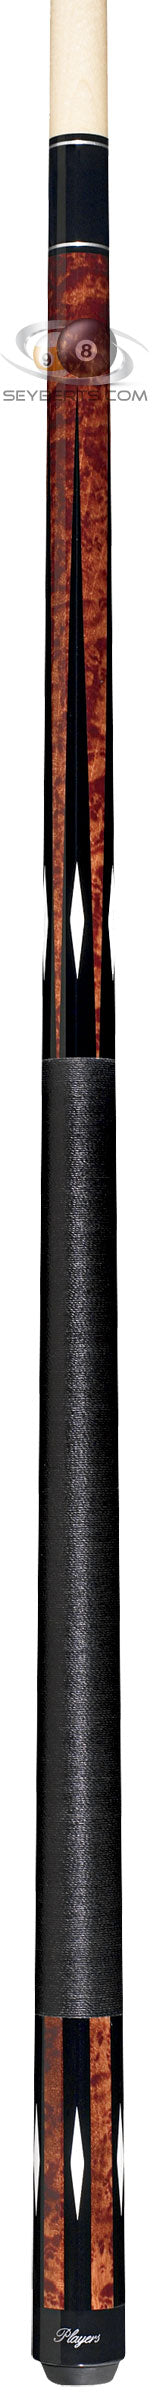 Players G-3350 Pool Cue